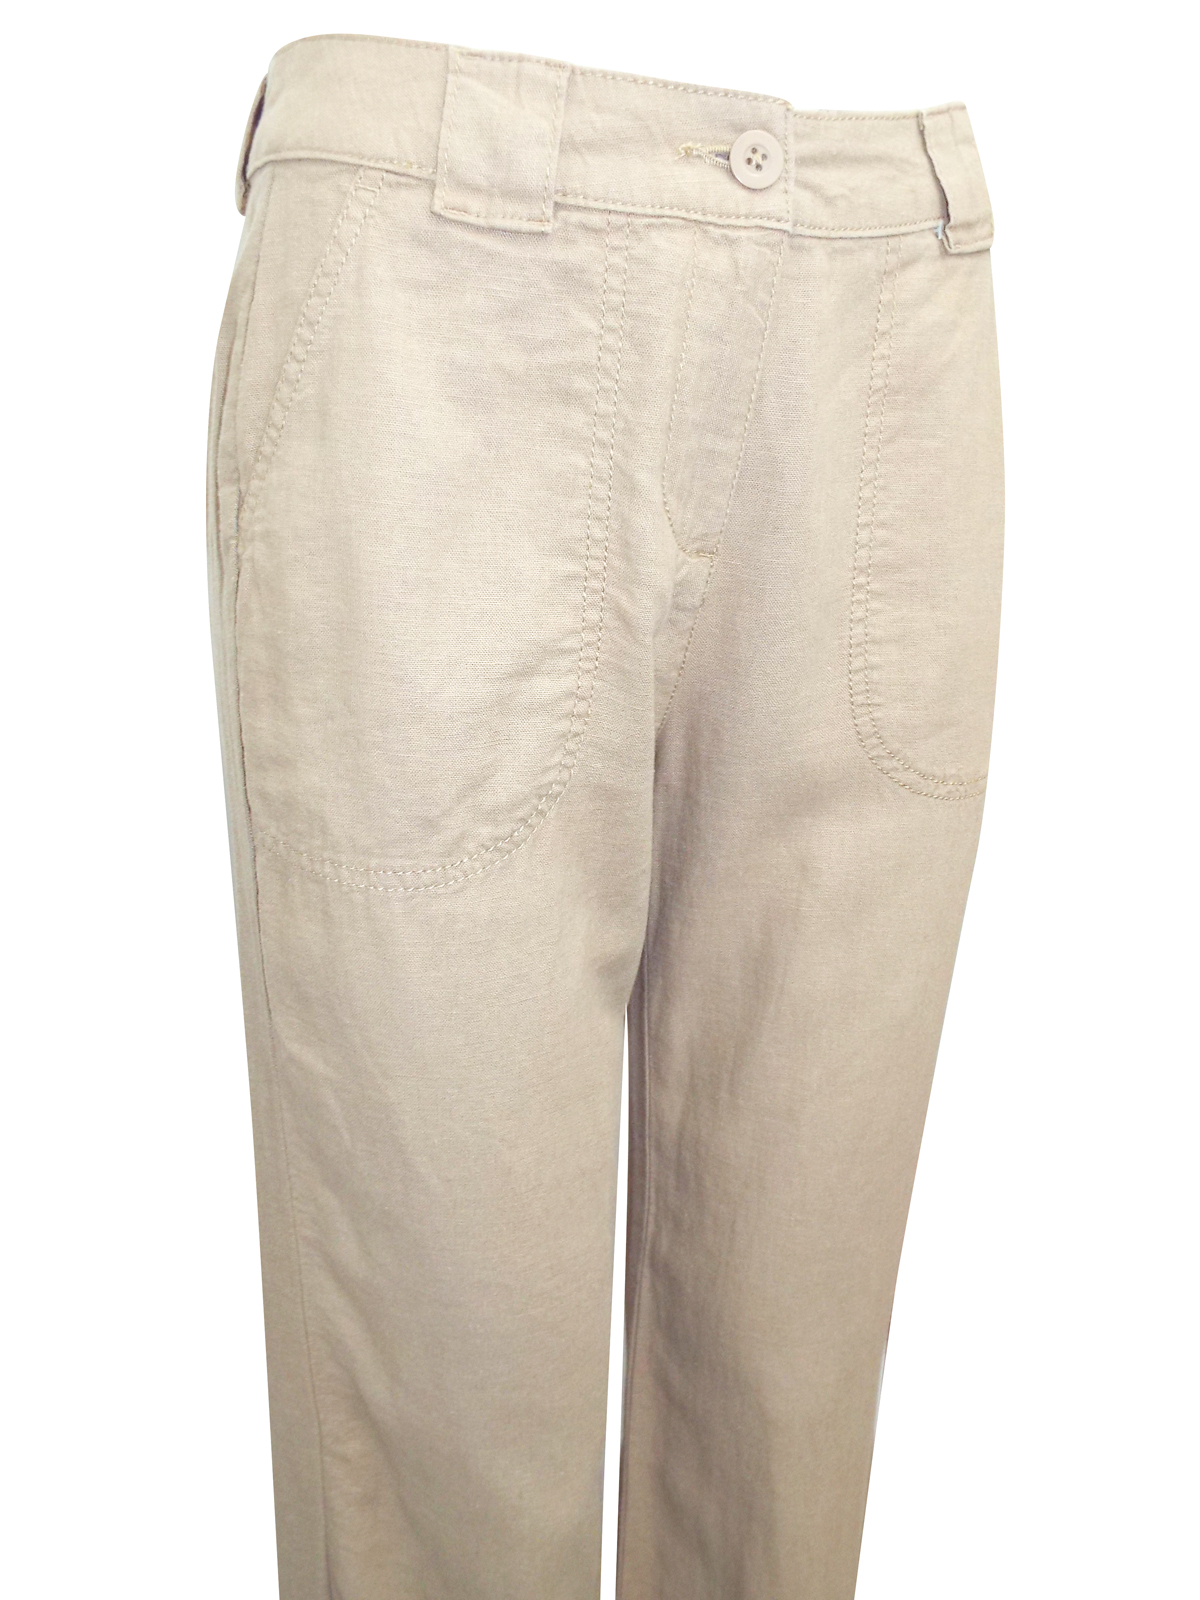 Marks and Spencer - - M&5 CAMEL Linen Blend Wide Leg Trousers - Size 8 ...